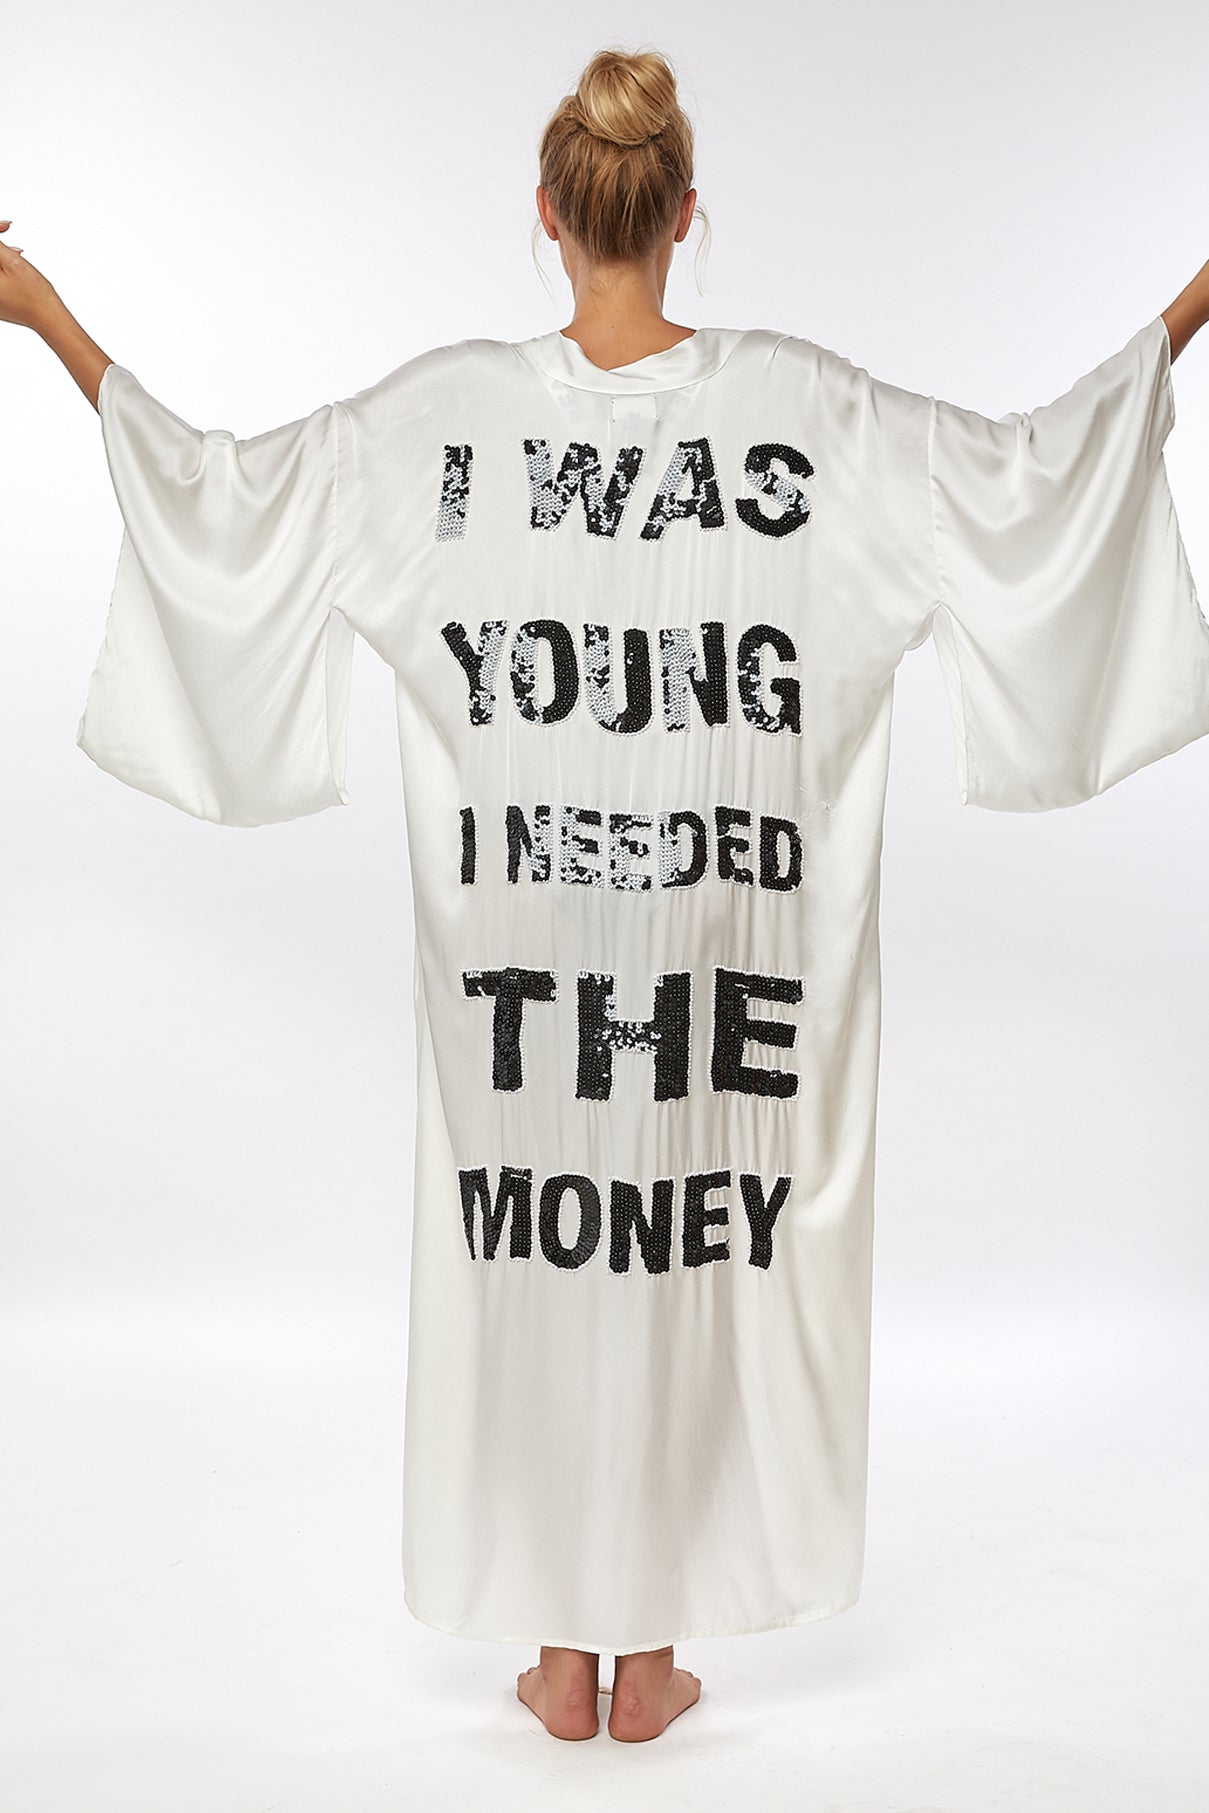 " I Was Young I Needed The Money " - Pre Order